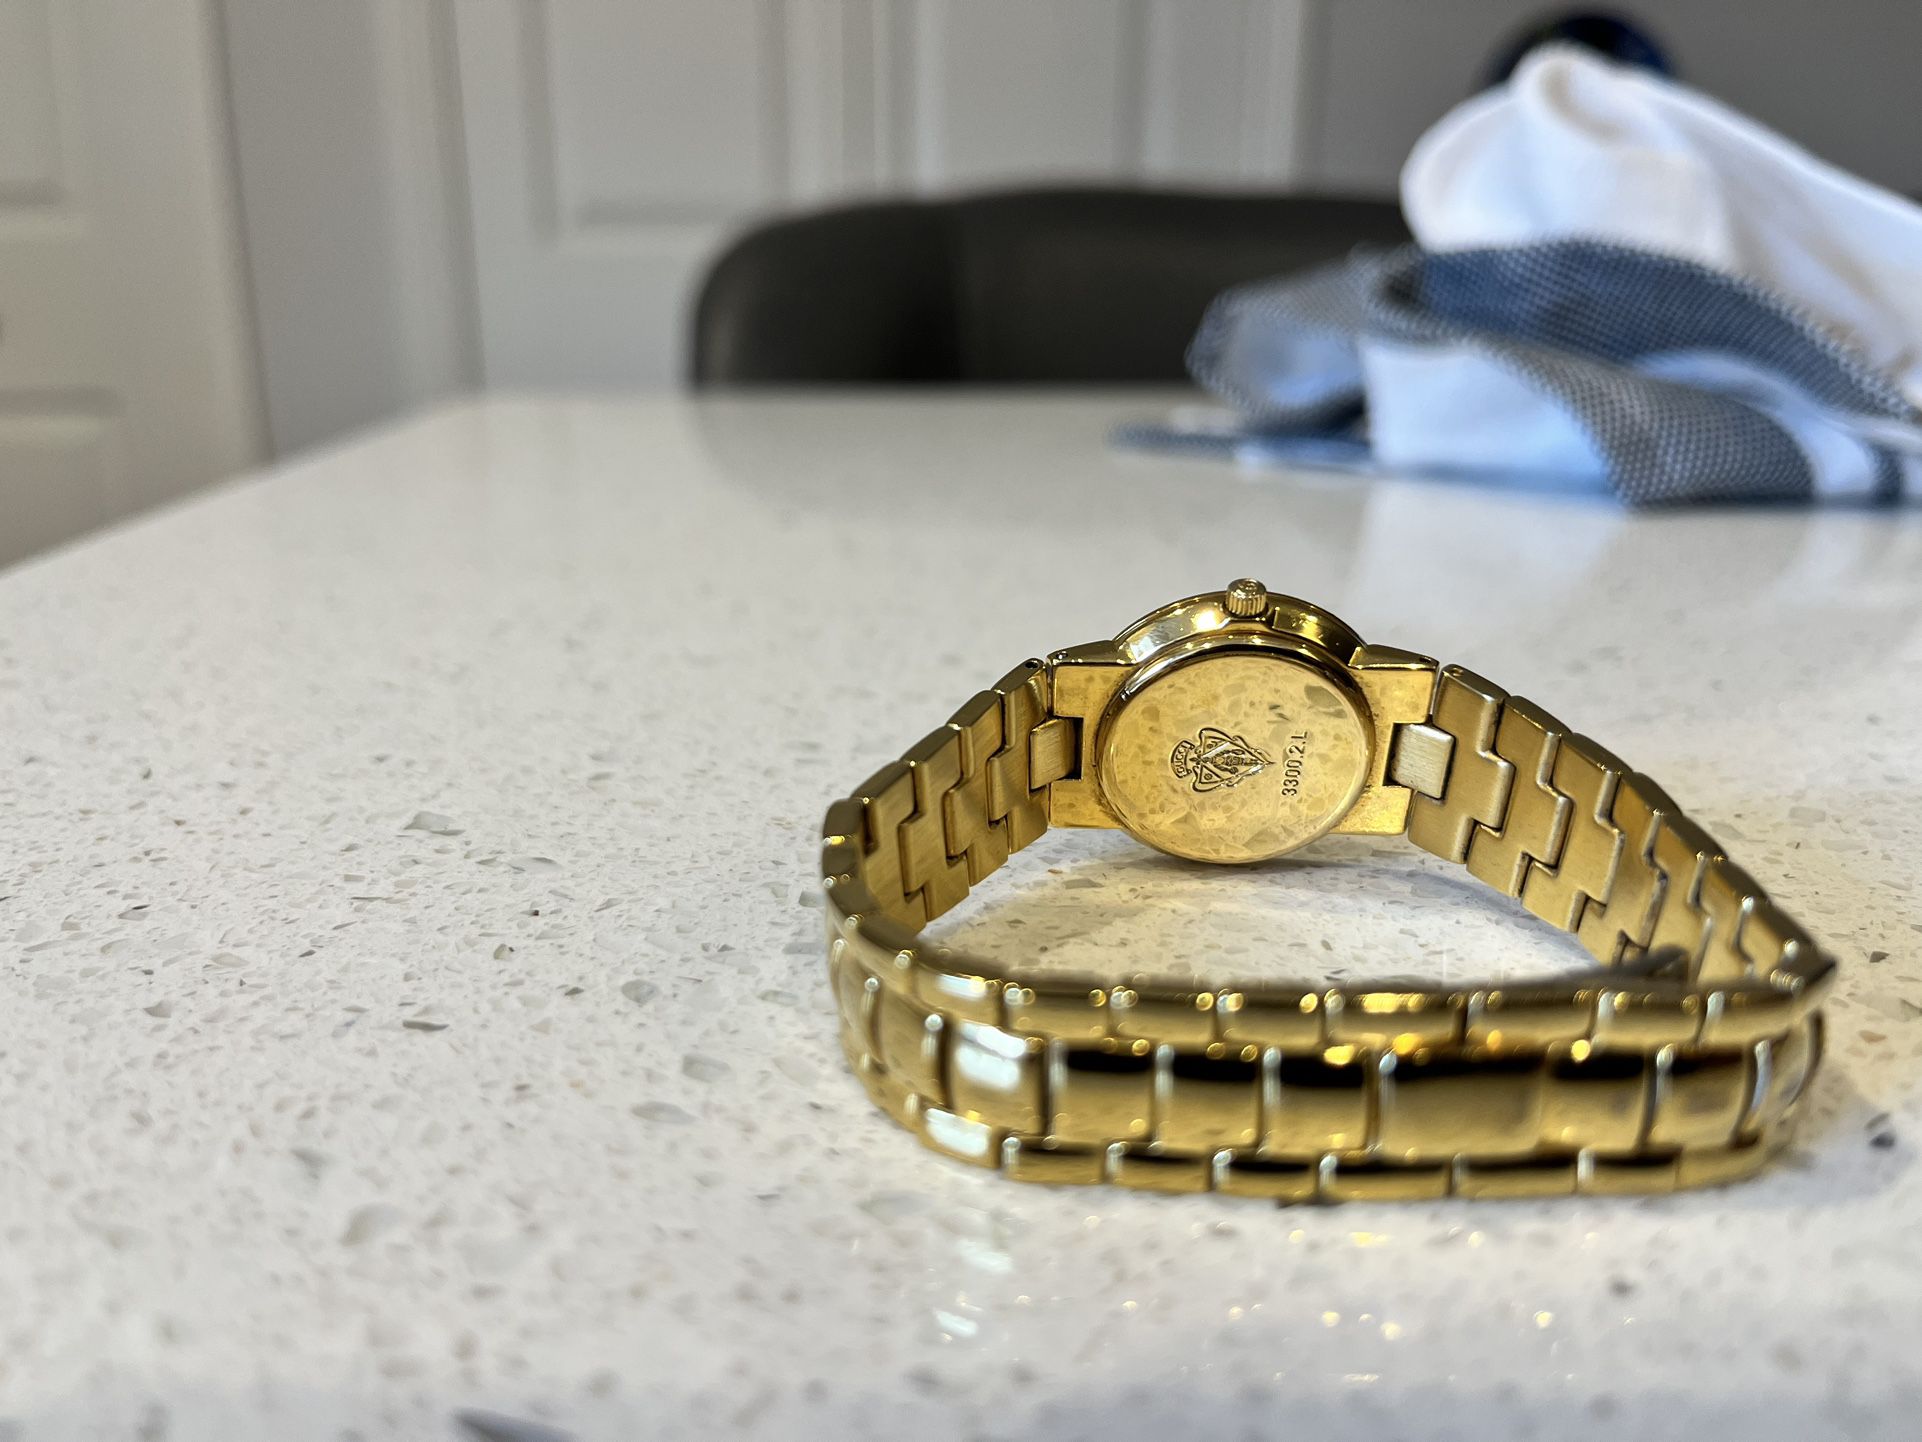 Women’s Authentic Gucci Watch Serial:3300.2.L